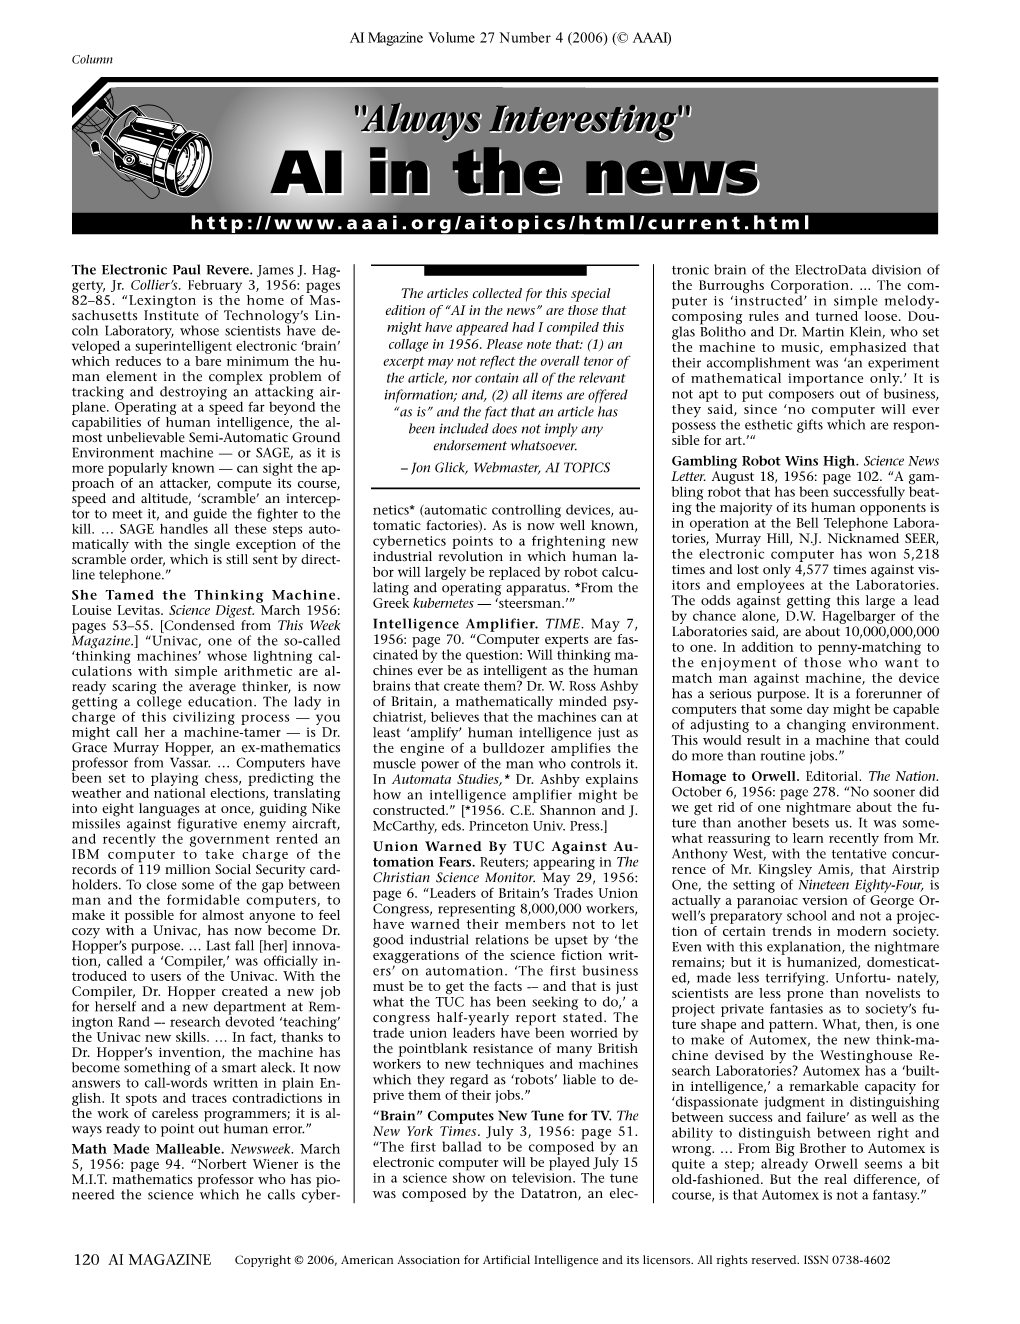 AI in the News” Are Those That Composing Rules and Turned Loose